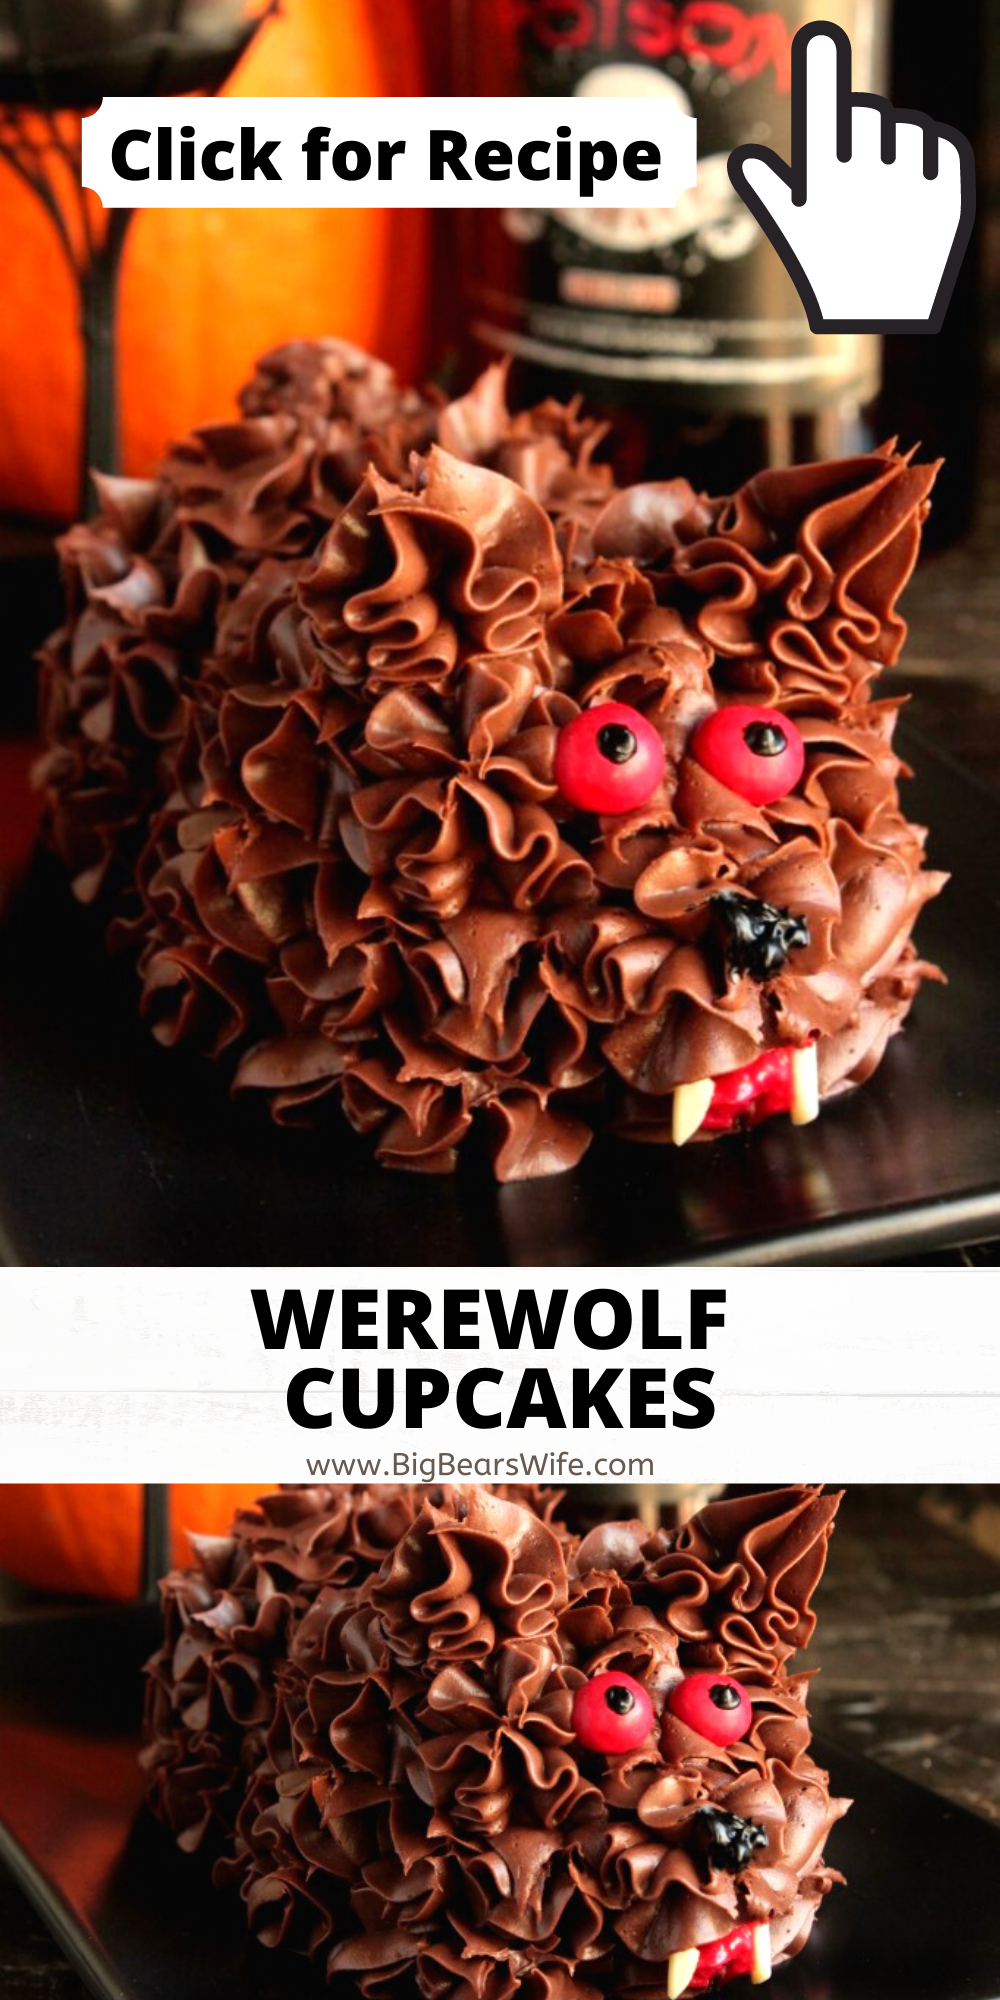 Cupcakes and Werewolf go hand and hand for Halloween! We're taking two cupcakes and turning them into this cute little Werewolf Cupcakes! via @bigbearswife